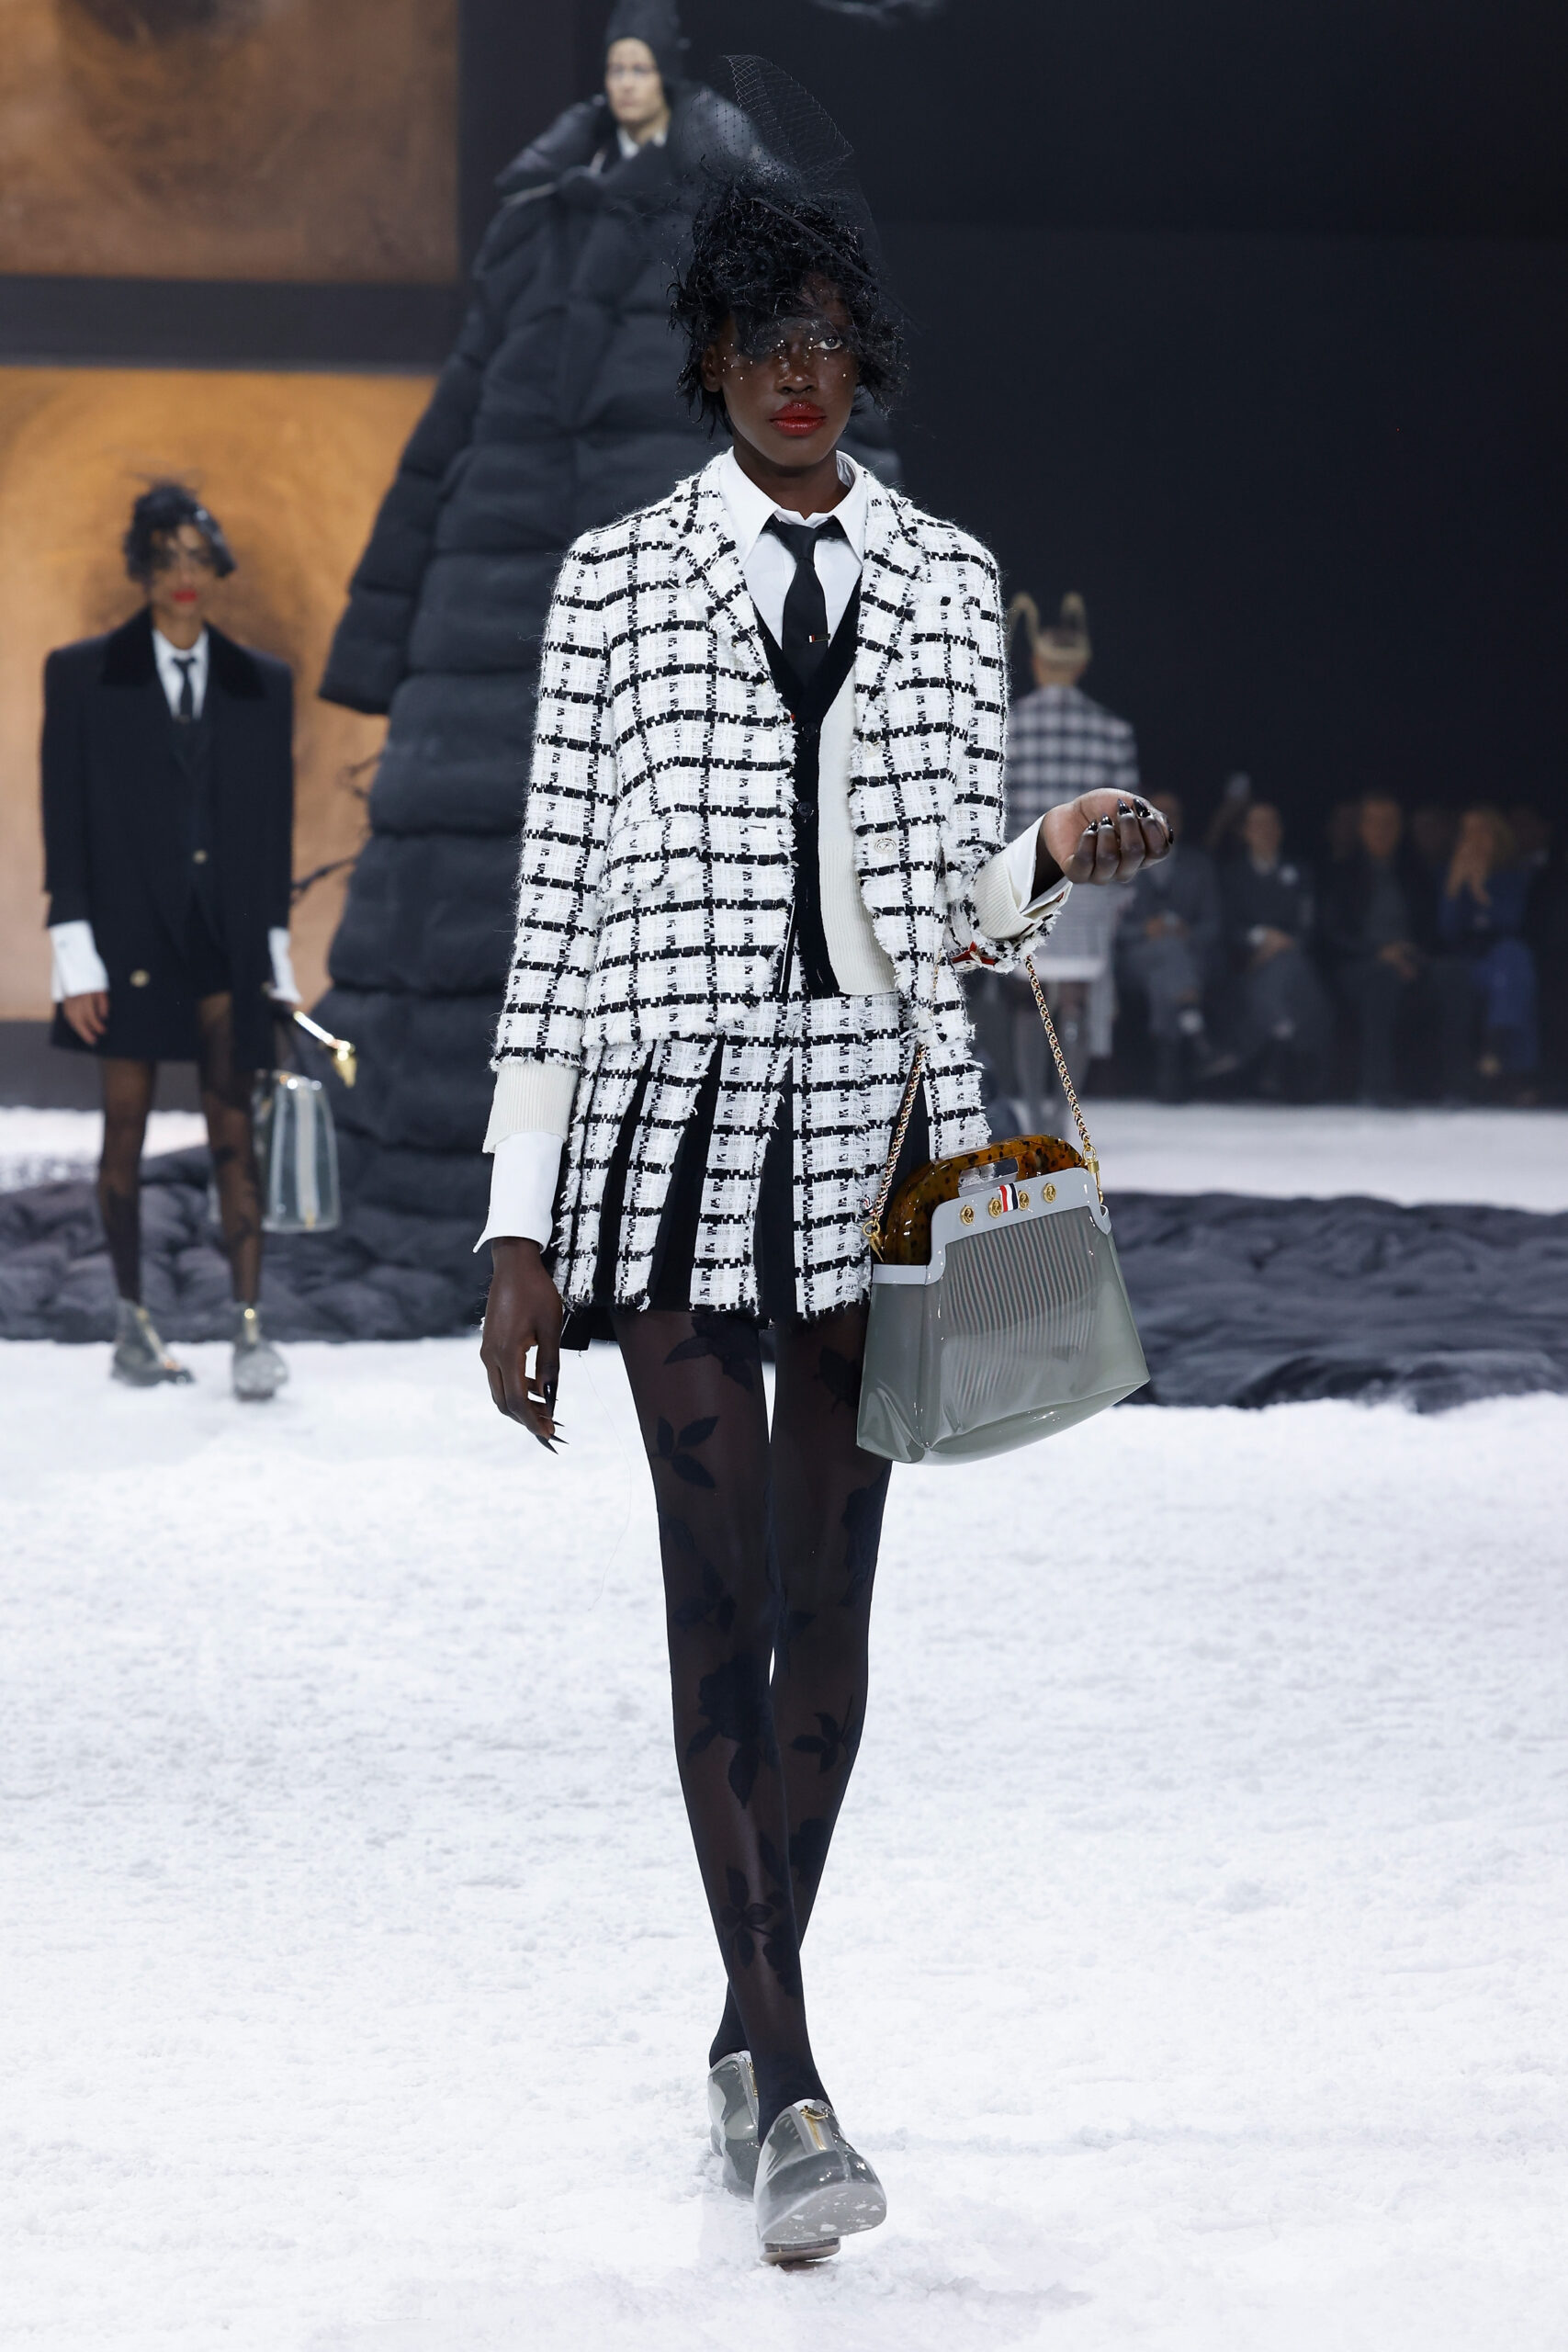 With a flair for drama (and a bit of romance) Thom Browne closes out New York Fashion Week with an epic return